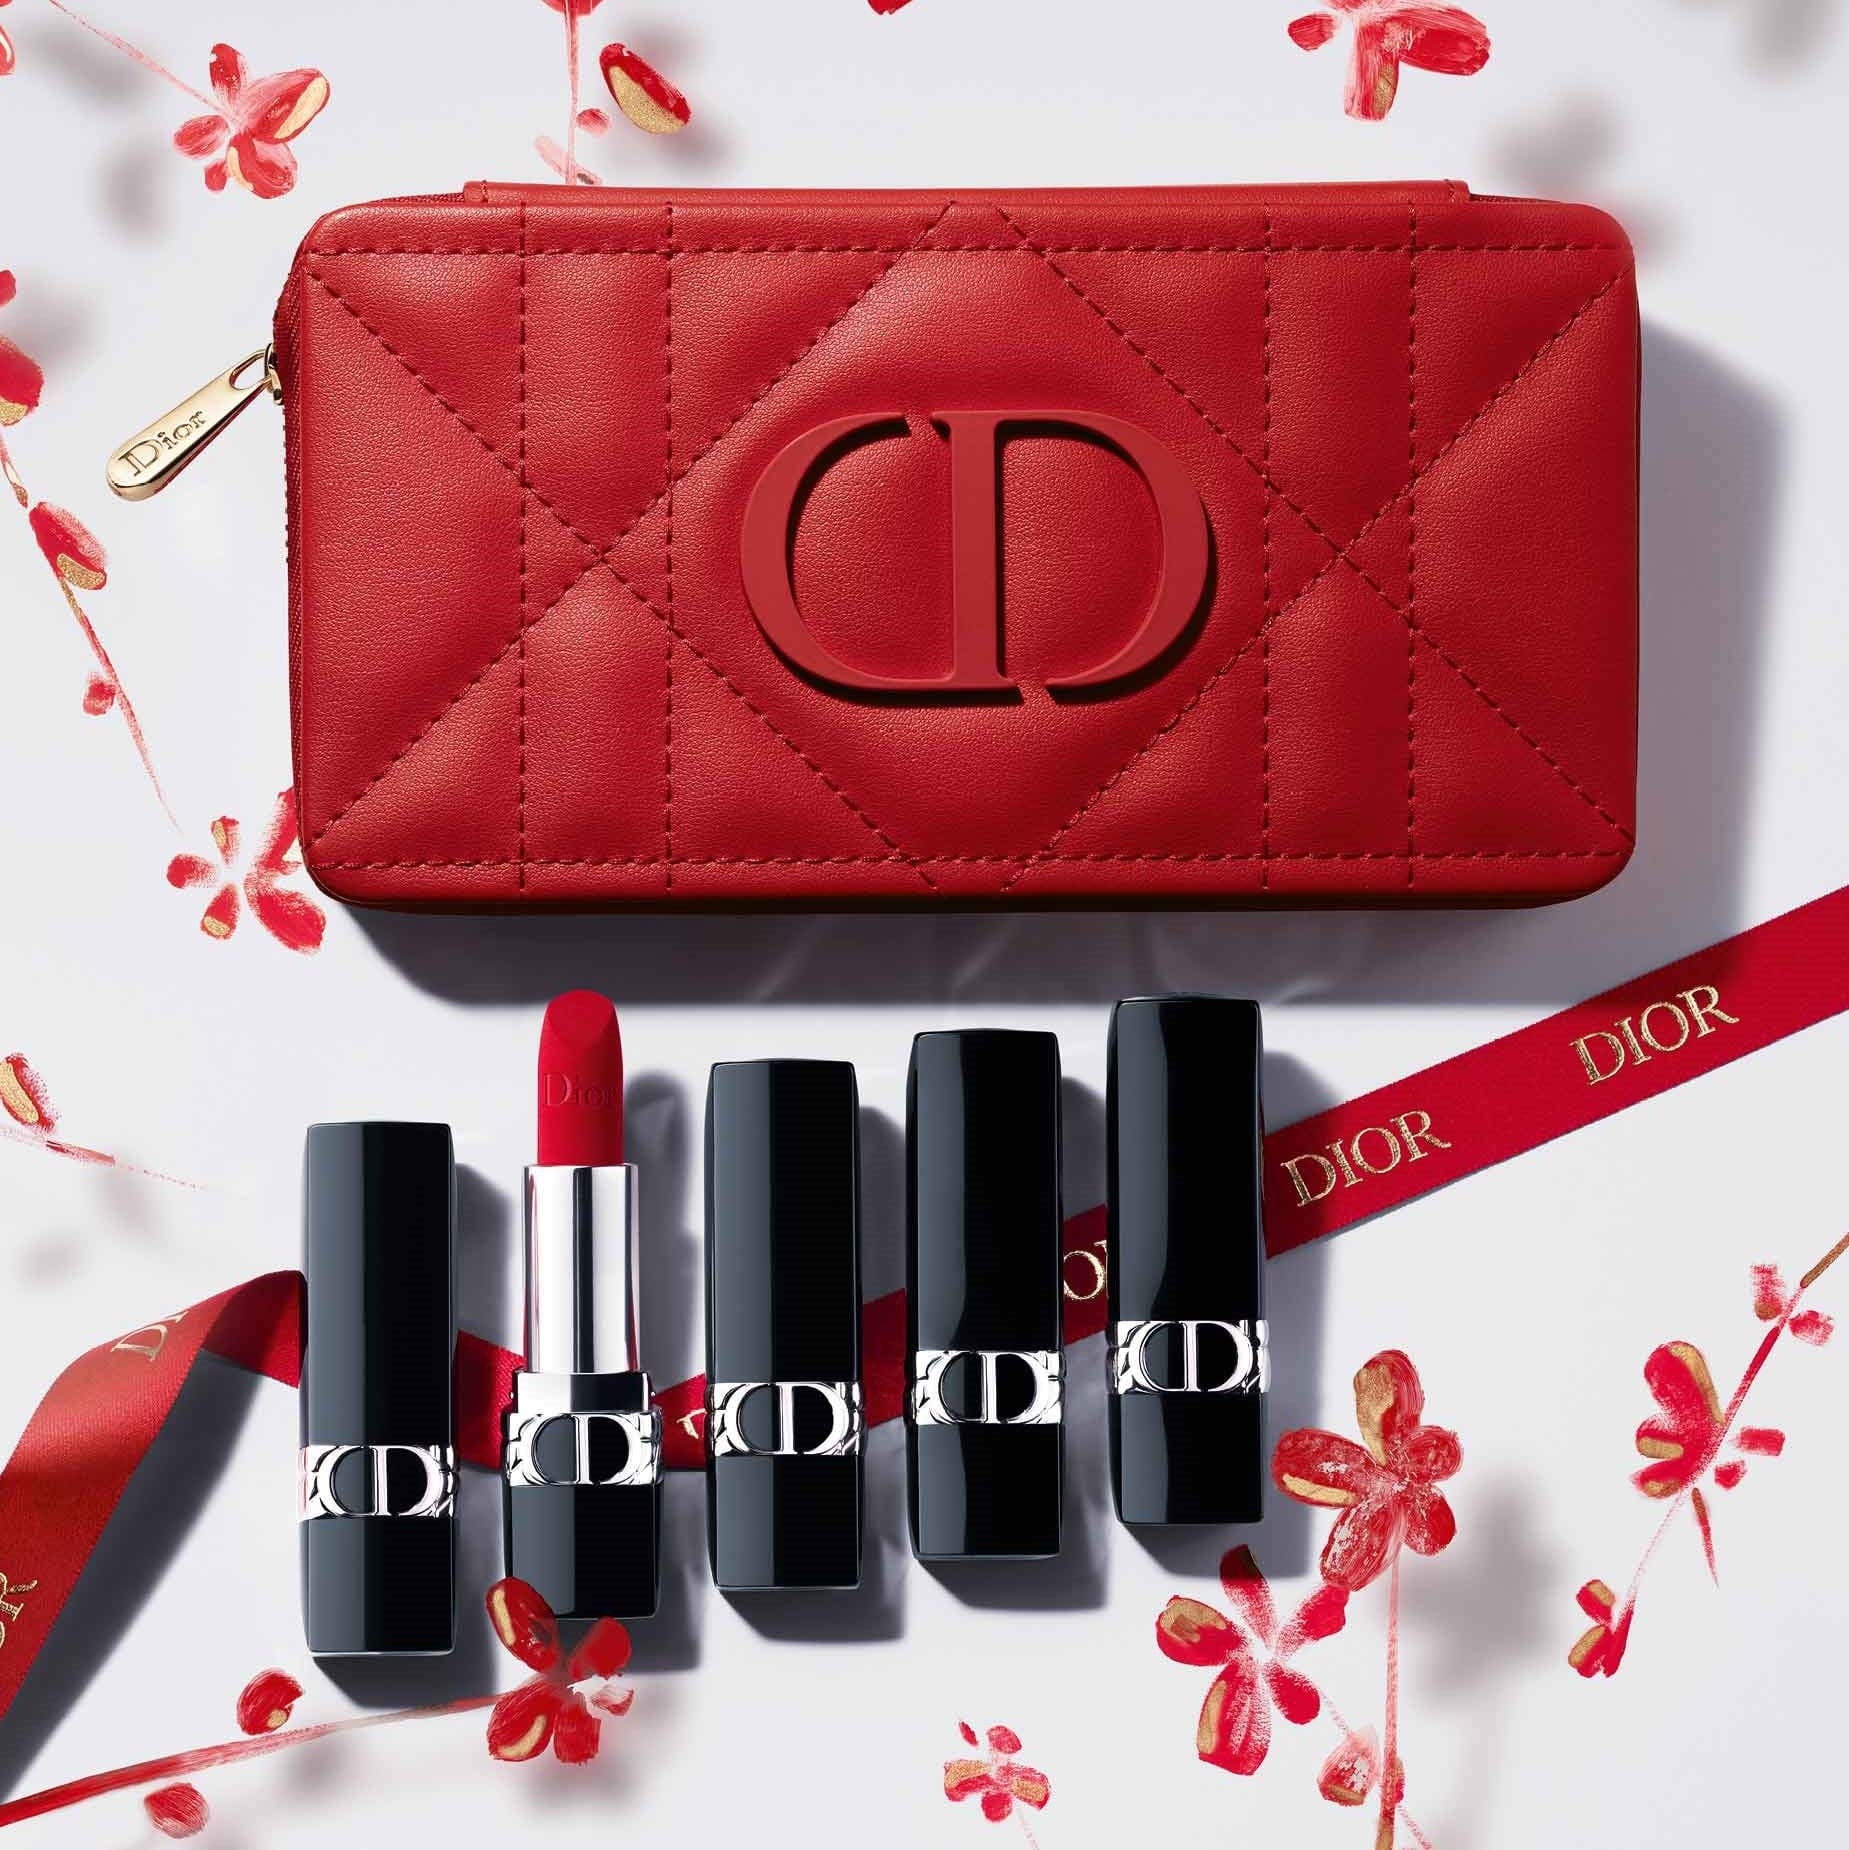 ROUGE DIOR | Refillable Lipstick Collection - Couture Color & Floral Lip Care - Long Wear